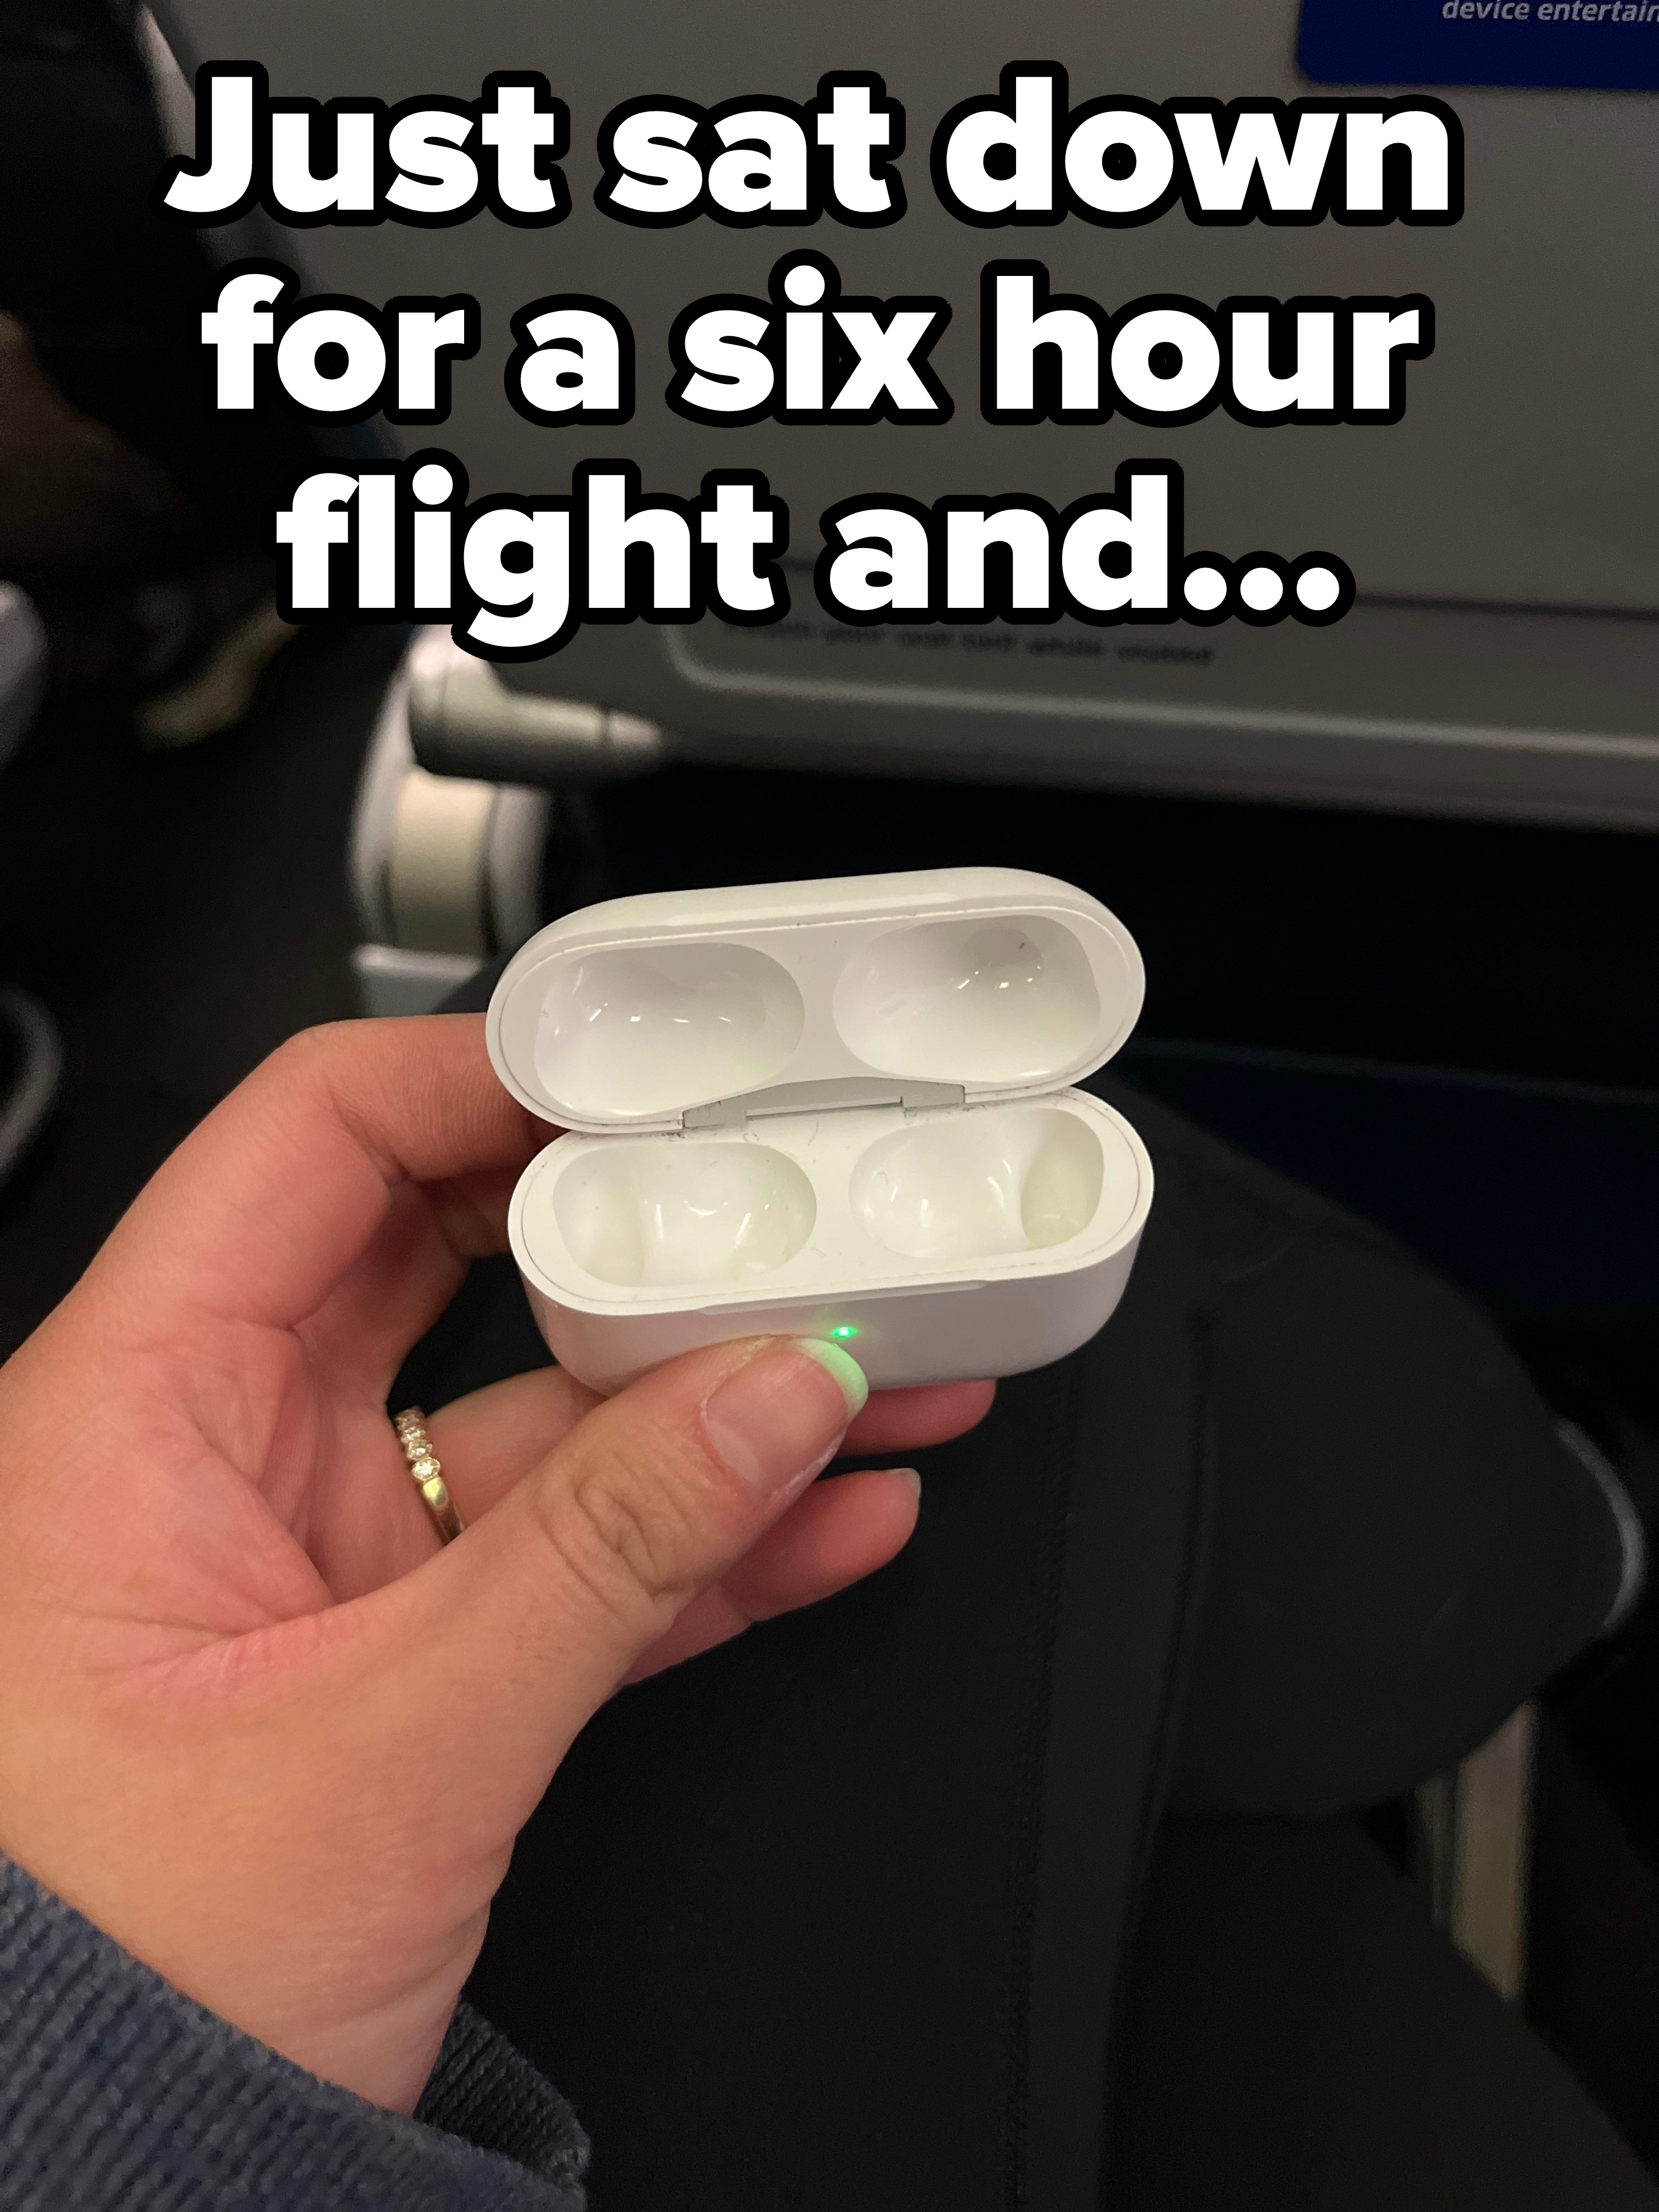 A person missing their AirPods